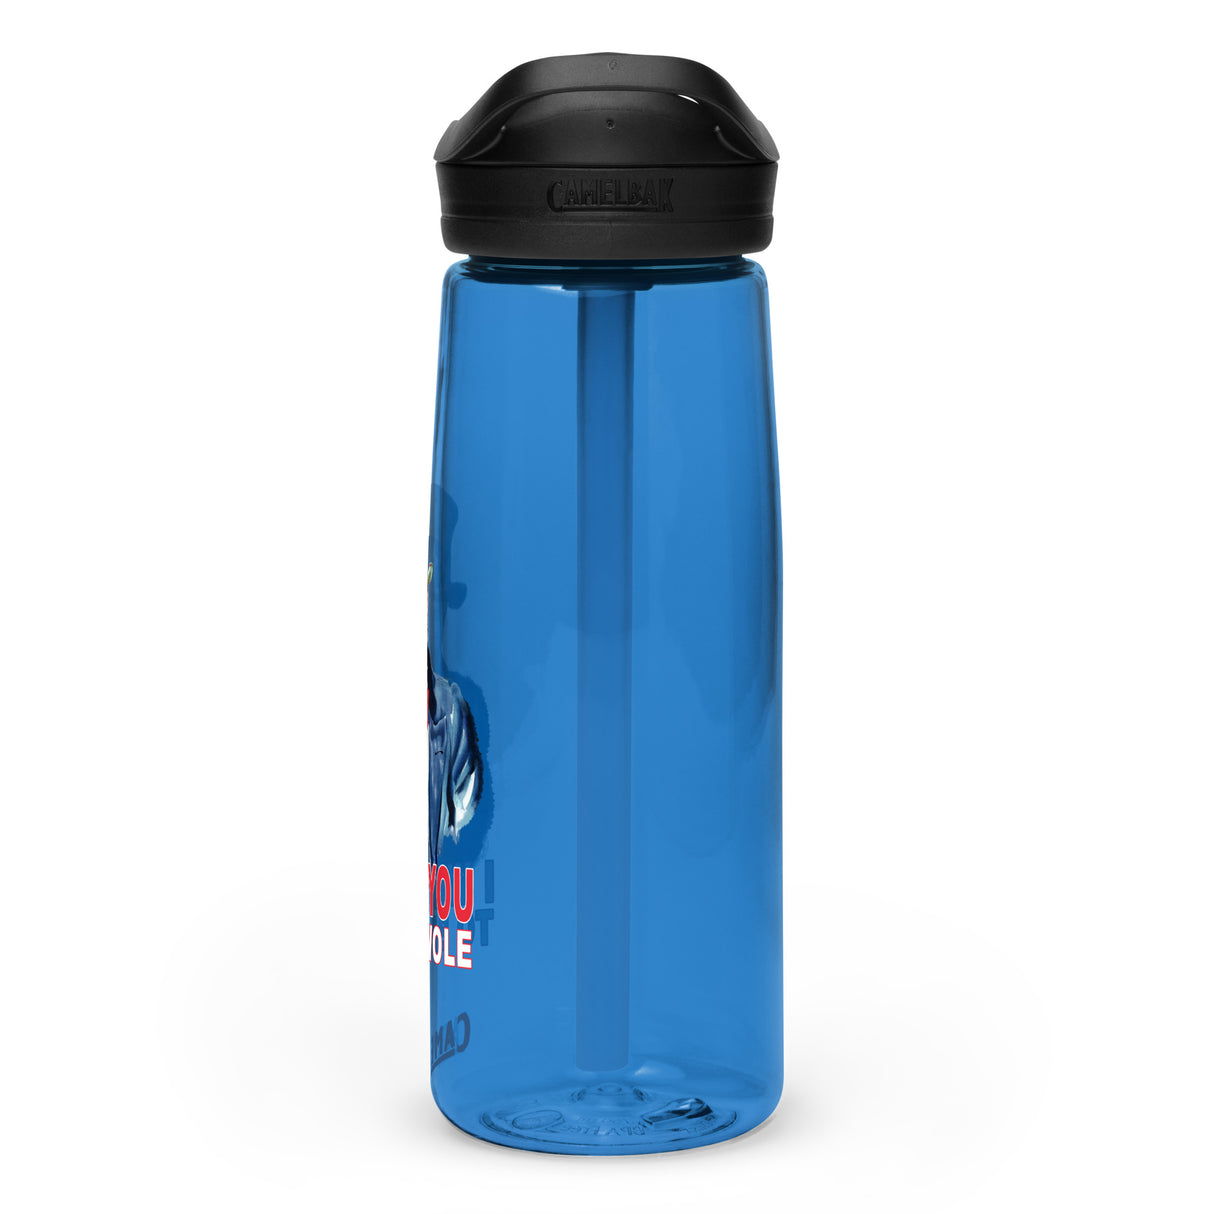 I Want You To Be Swole Water Bottle